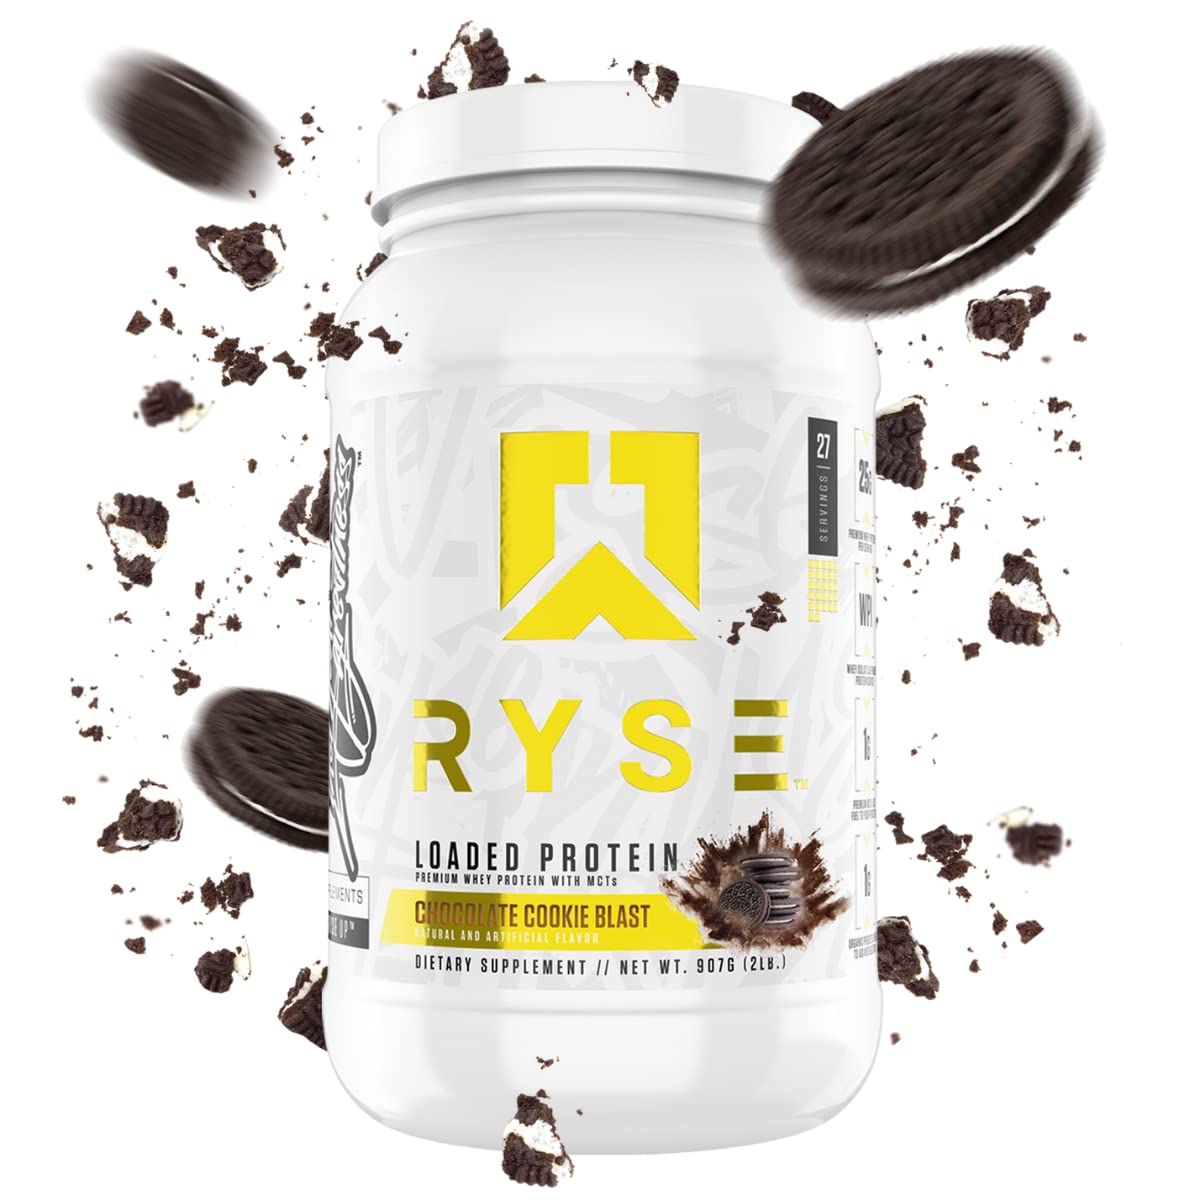 Loaded Premium Whey Protein with MCTs - Chocolate Cookie Blast (2.3 Lbs. /  27 Servings) by Ryse at the Vitamin Shoppe